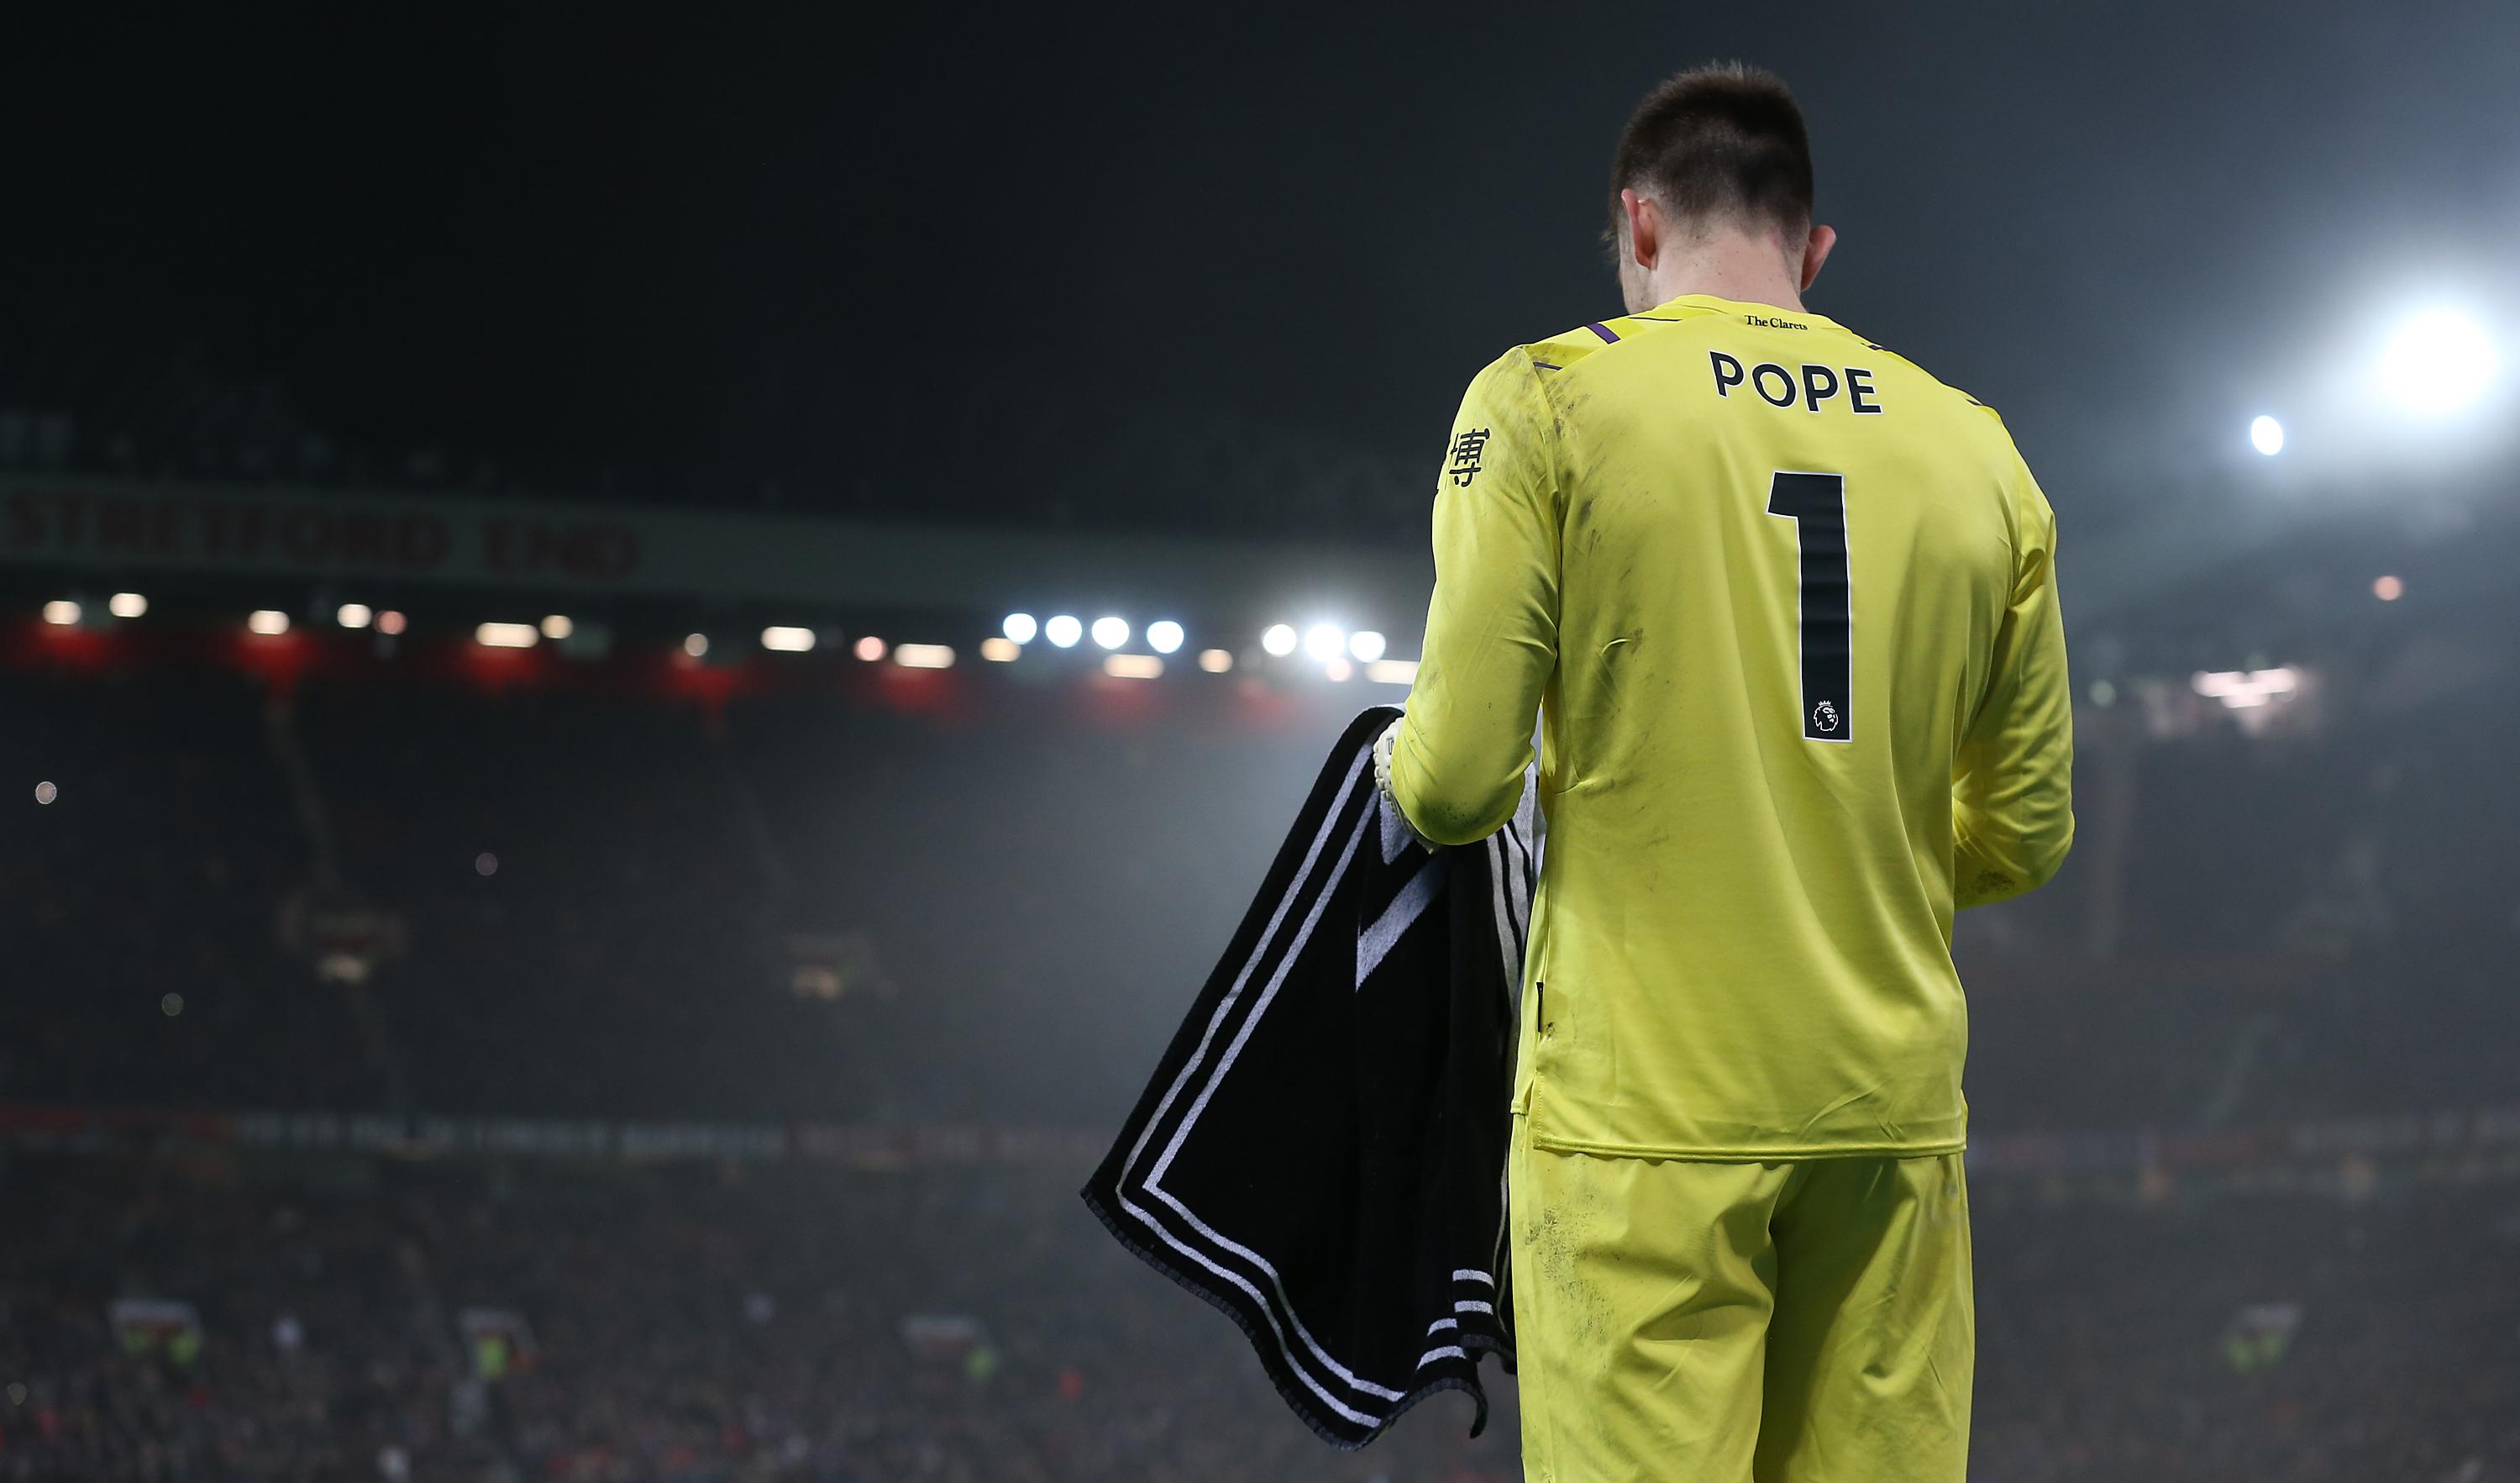 Reports | Nick Pope to be given chance to oust Jordan Pickford as England number 1